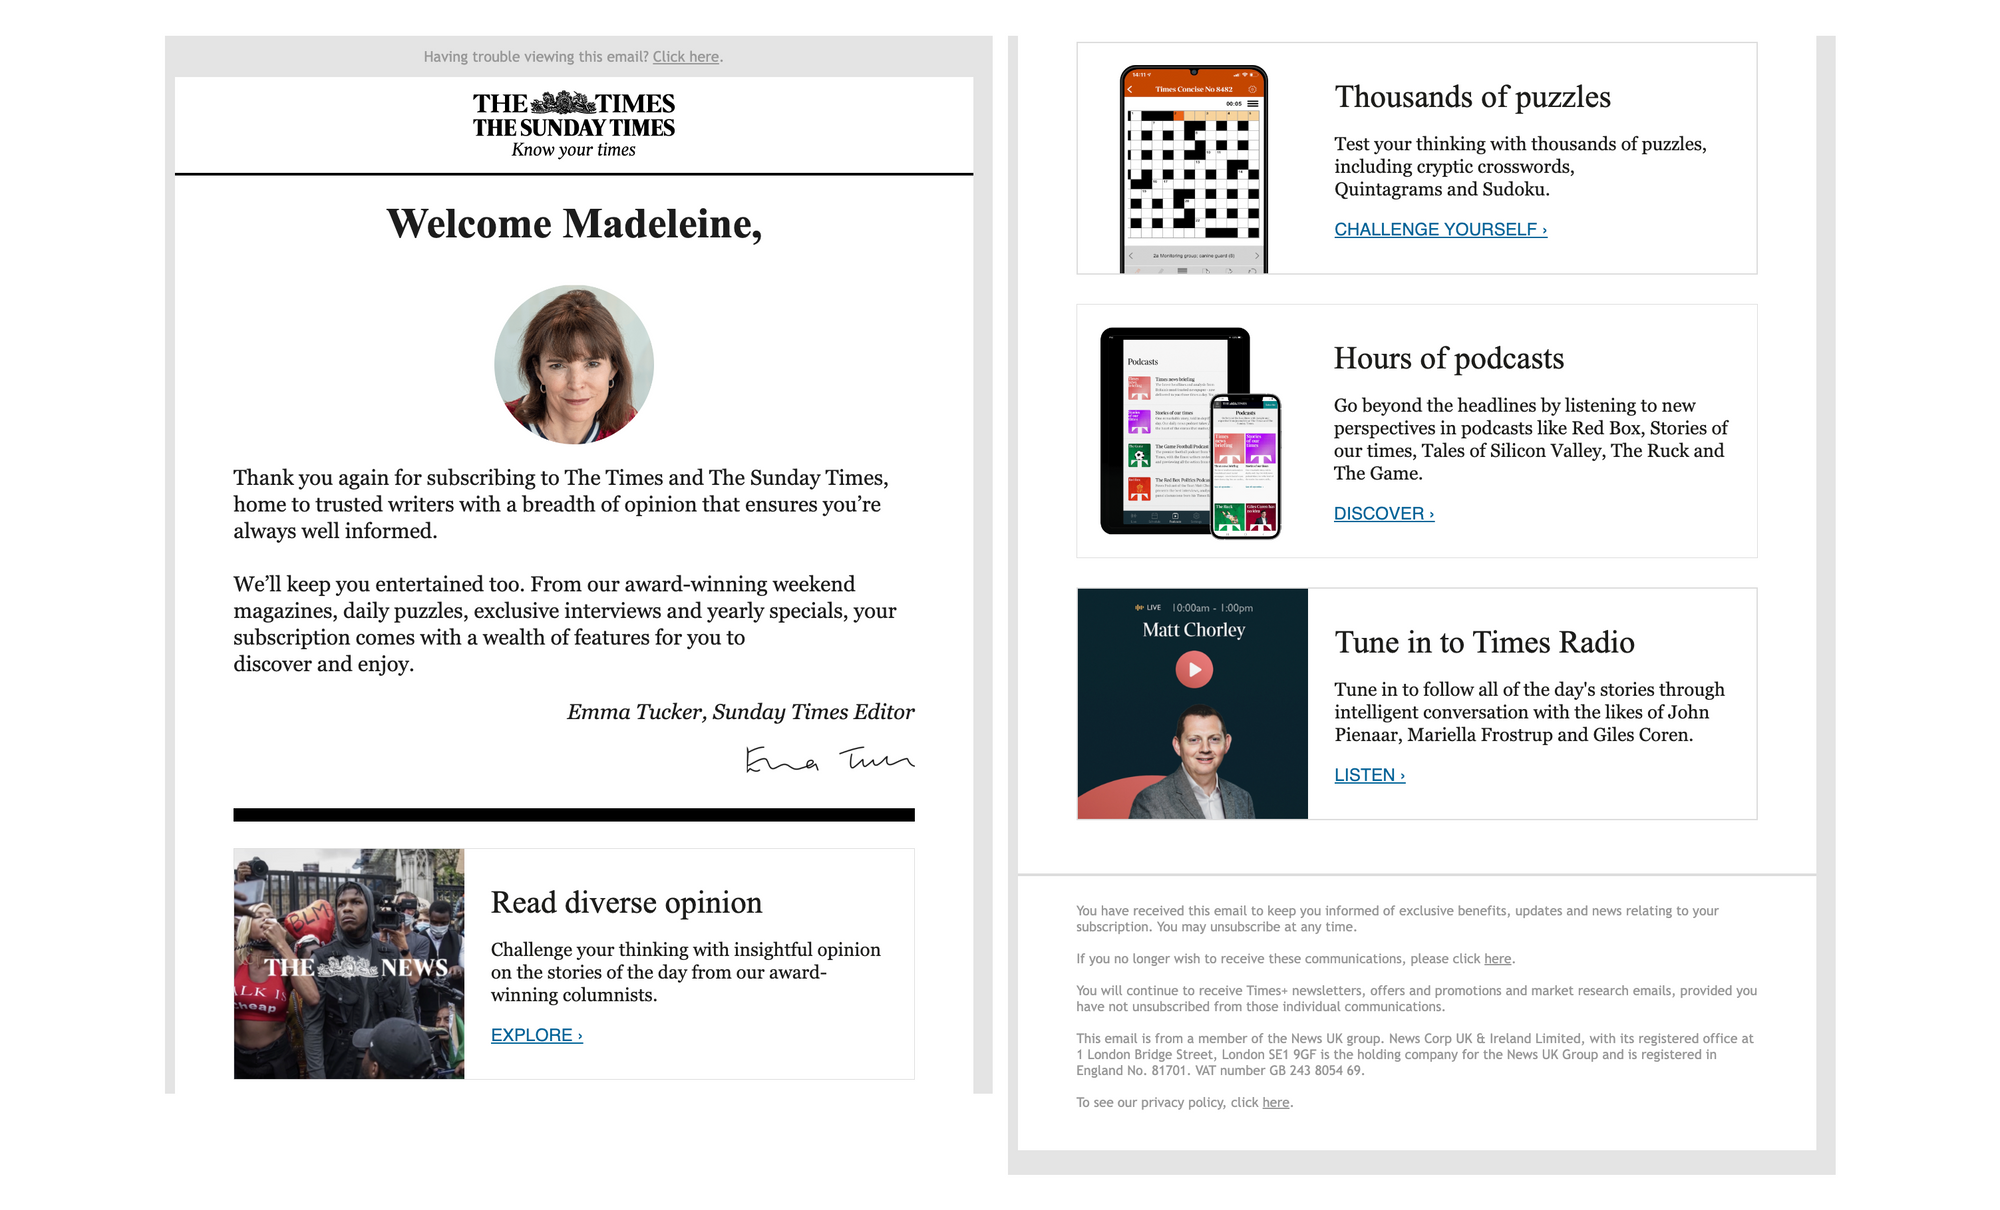 The Times & Sunday Times subscriber onboarding